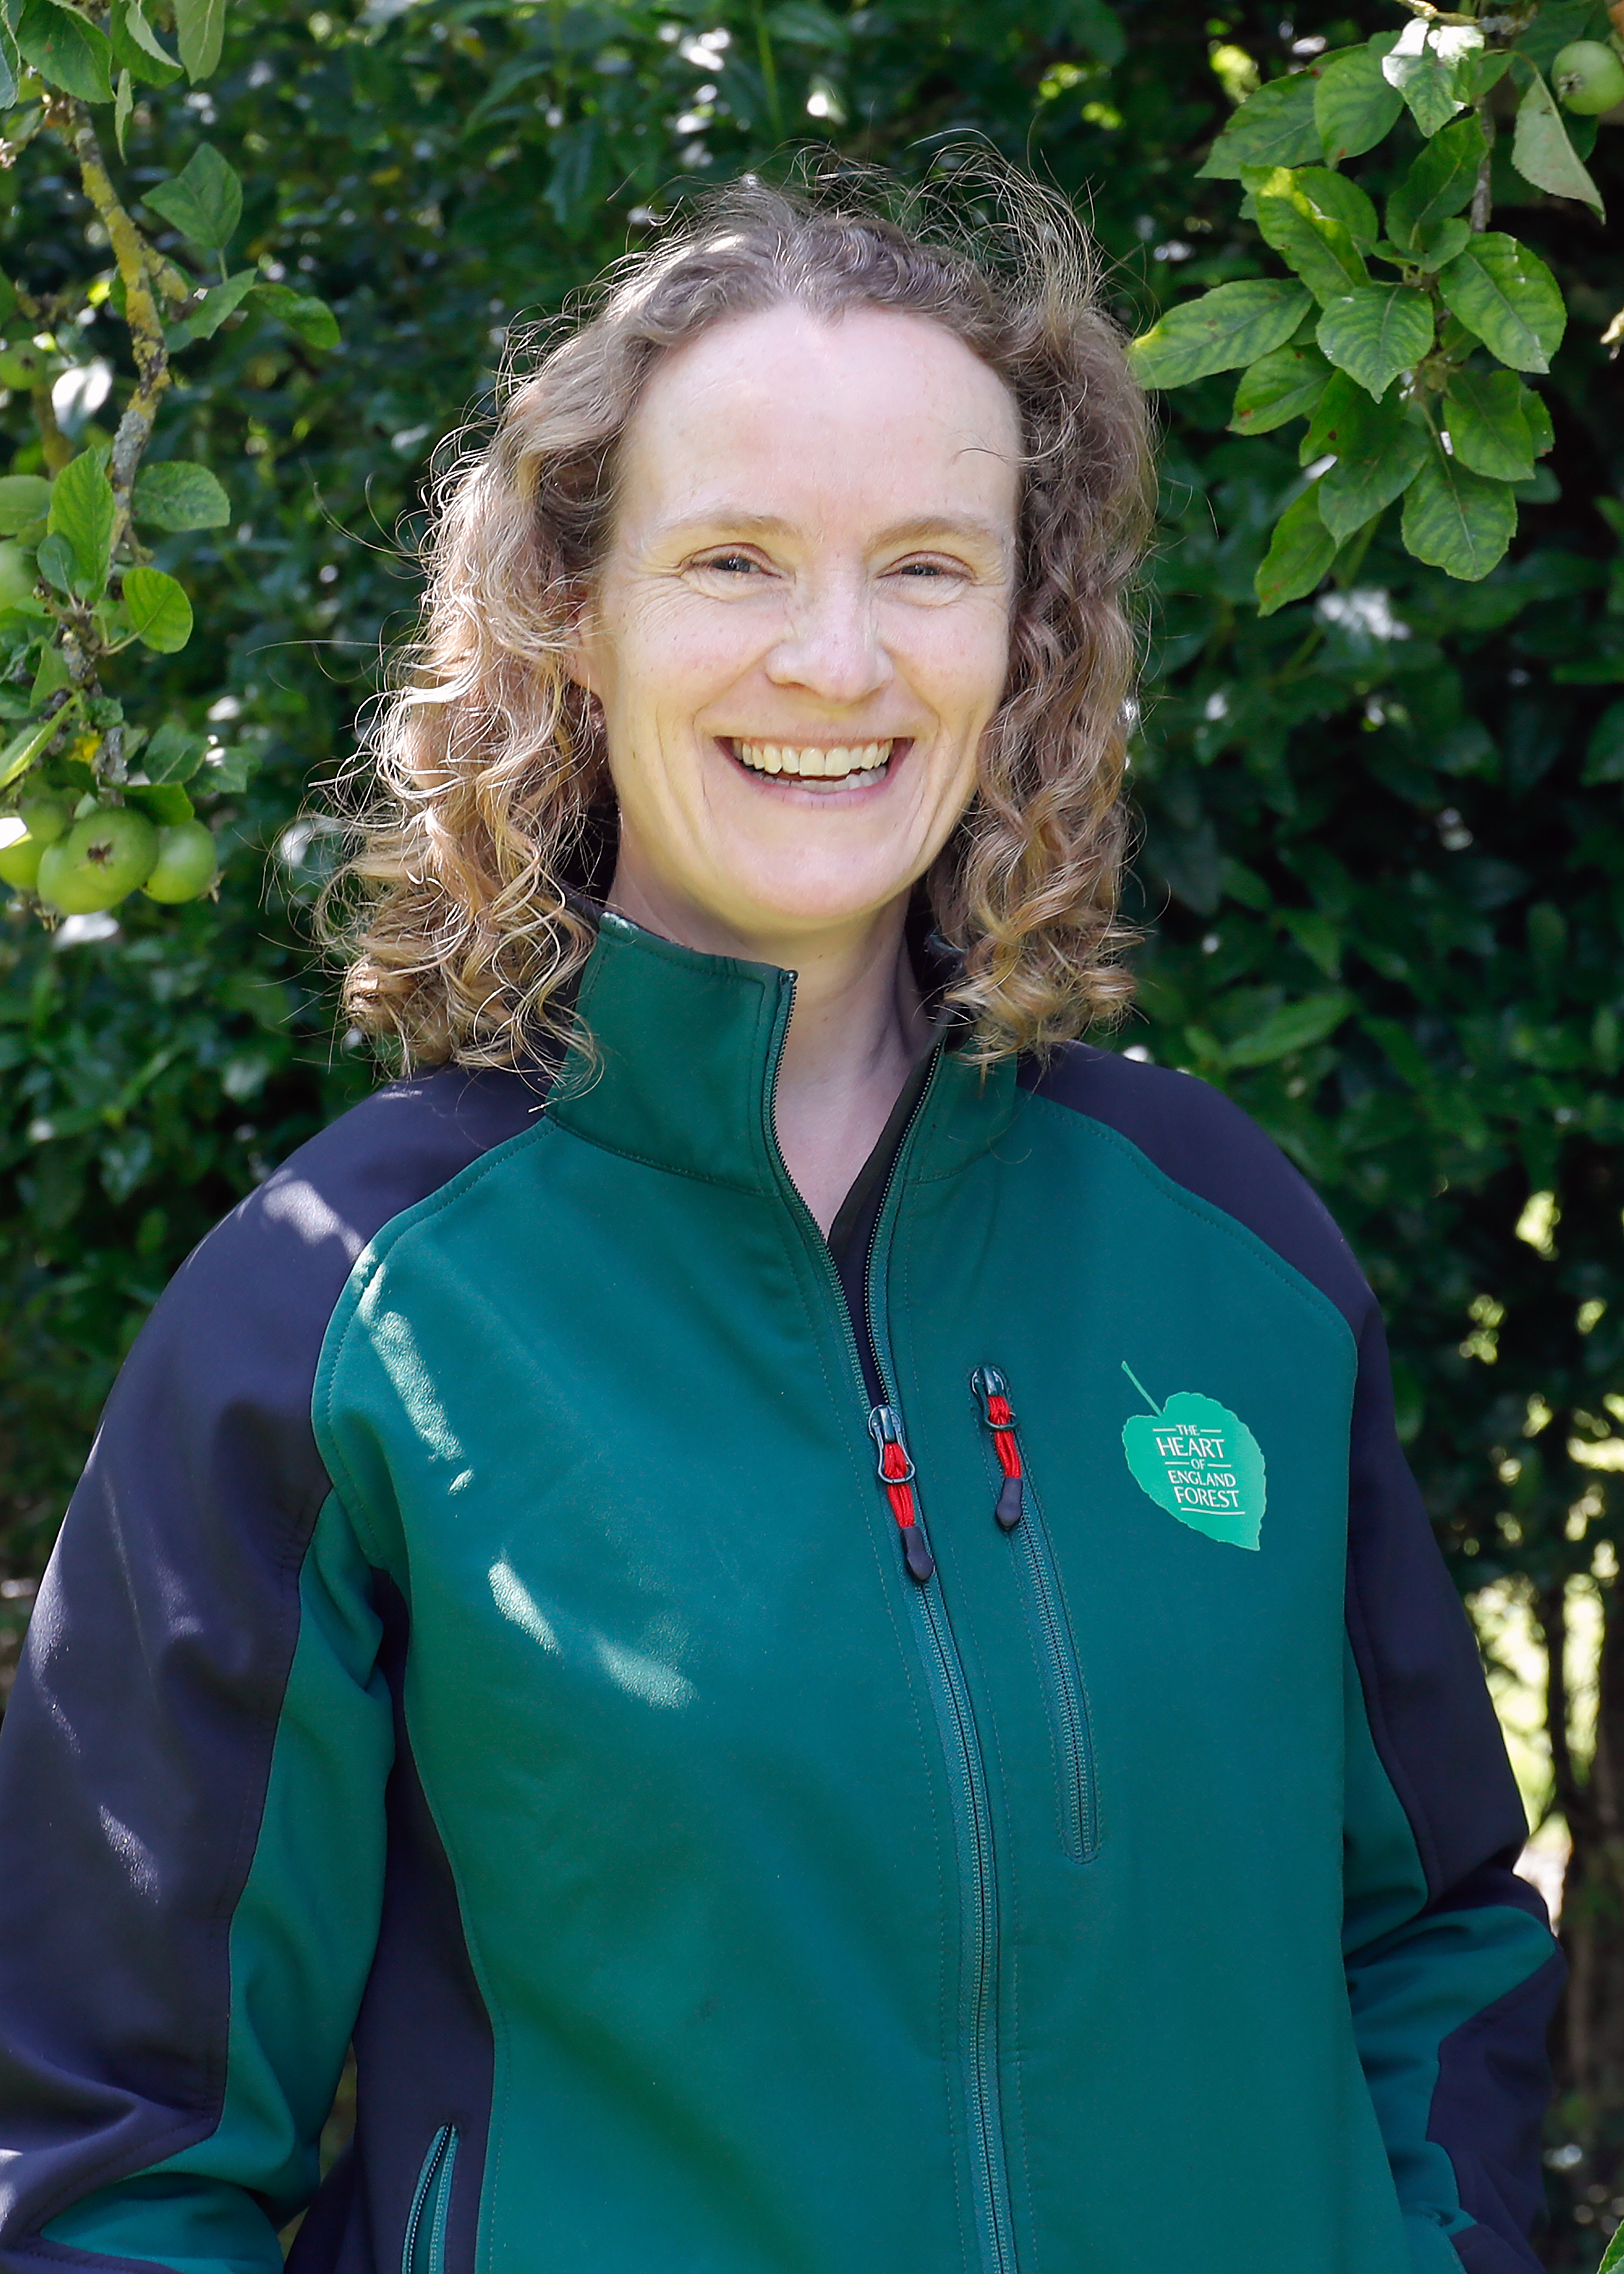 Close up portrait photo of Sophie, our Biodiversity Manager, stood smiling in front of some green leaves and wearing a green Heart of England Forest jacket.